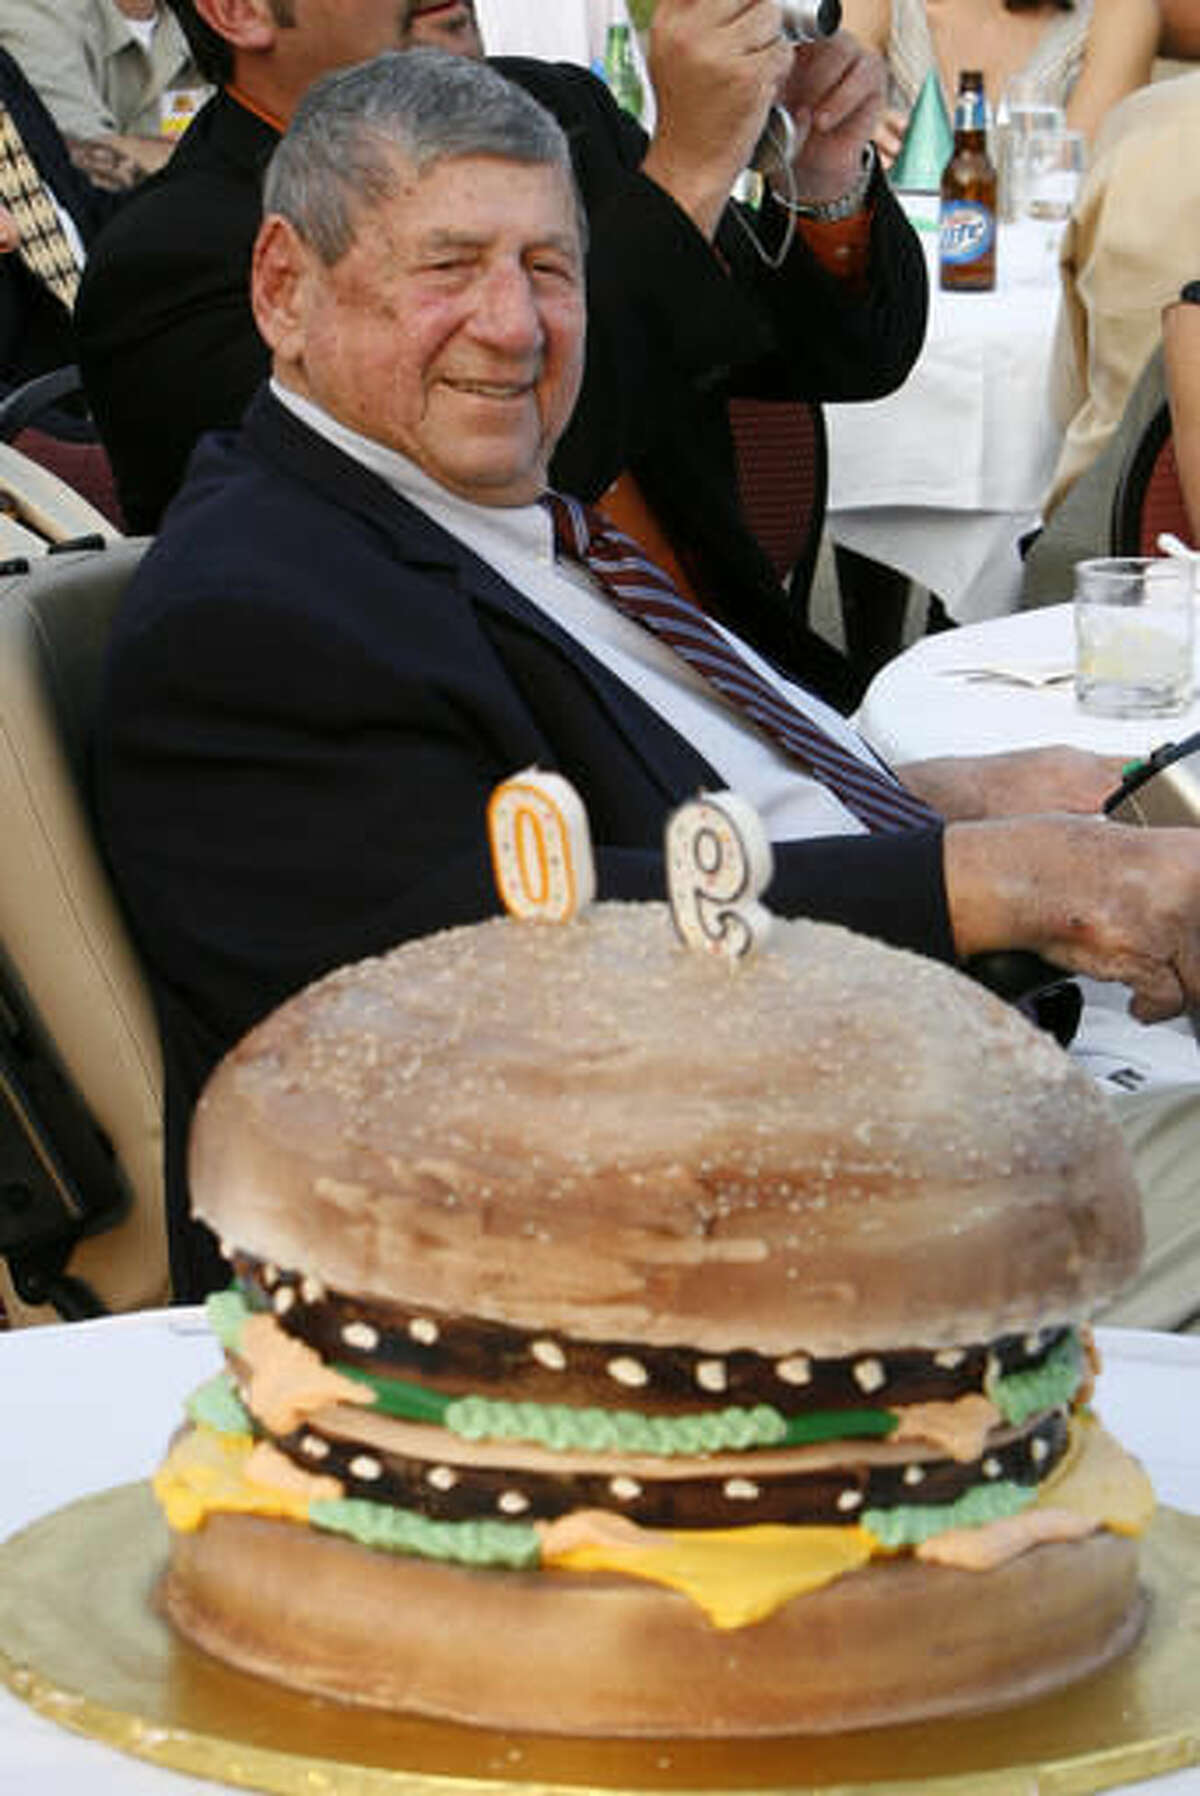 FILE - In this Aug. 21, 2008, file photo, Big Mac creator Michael "Jim" Delligatti sits behind a Big Mac birthday cake at his 90th birthday party in Canonsburg, Pa. Delligatti, the Pittsburgh-area McDonald's franchisee who created the Big Mac in 1967, has died. He was 98. (AP Photo/Gene J. Puskar, File)